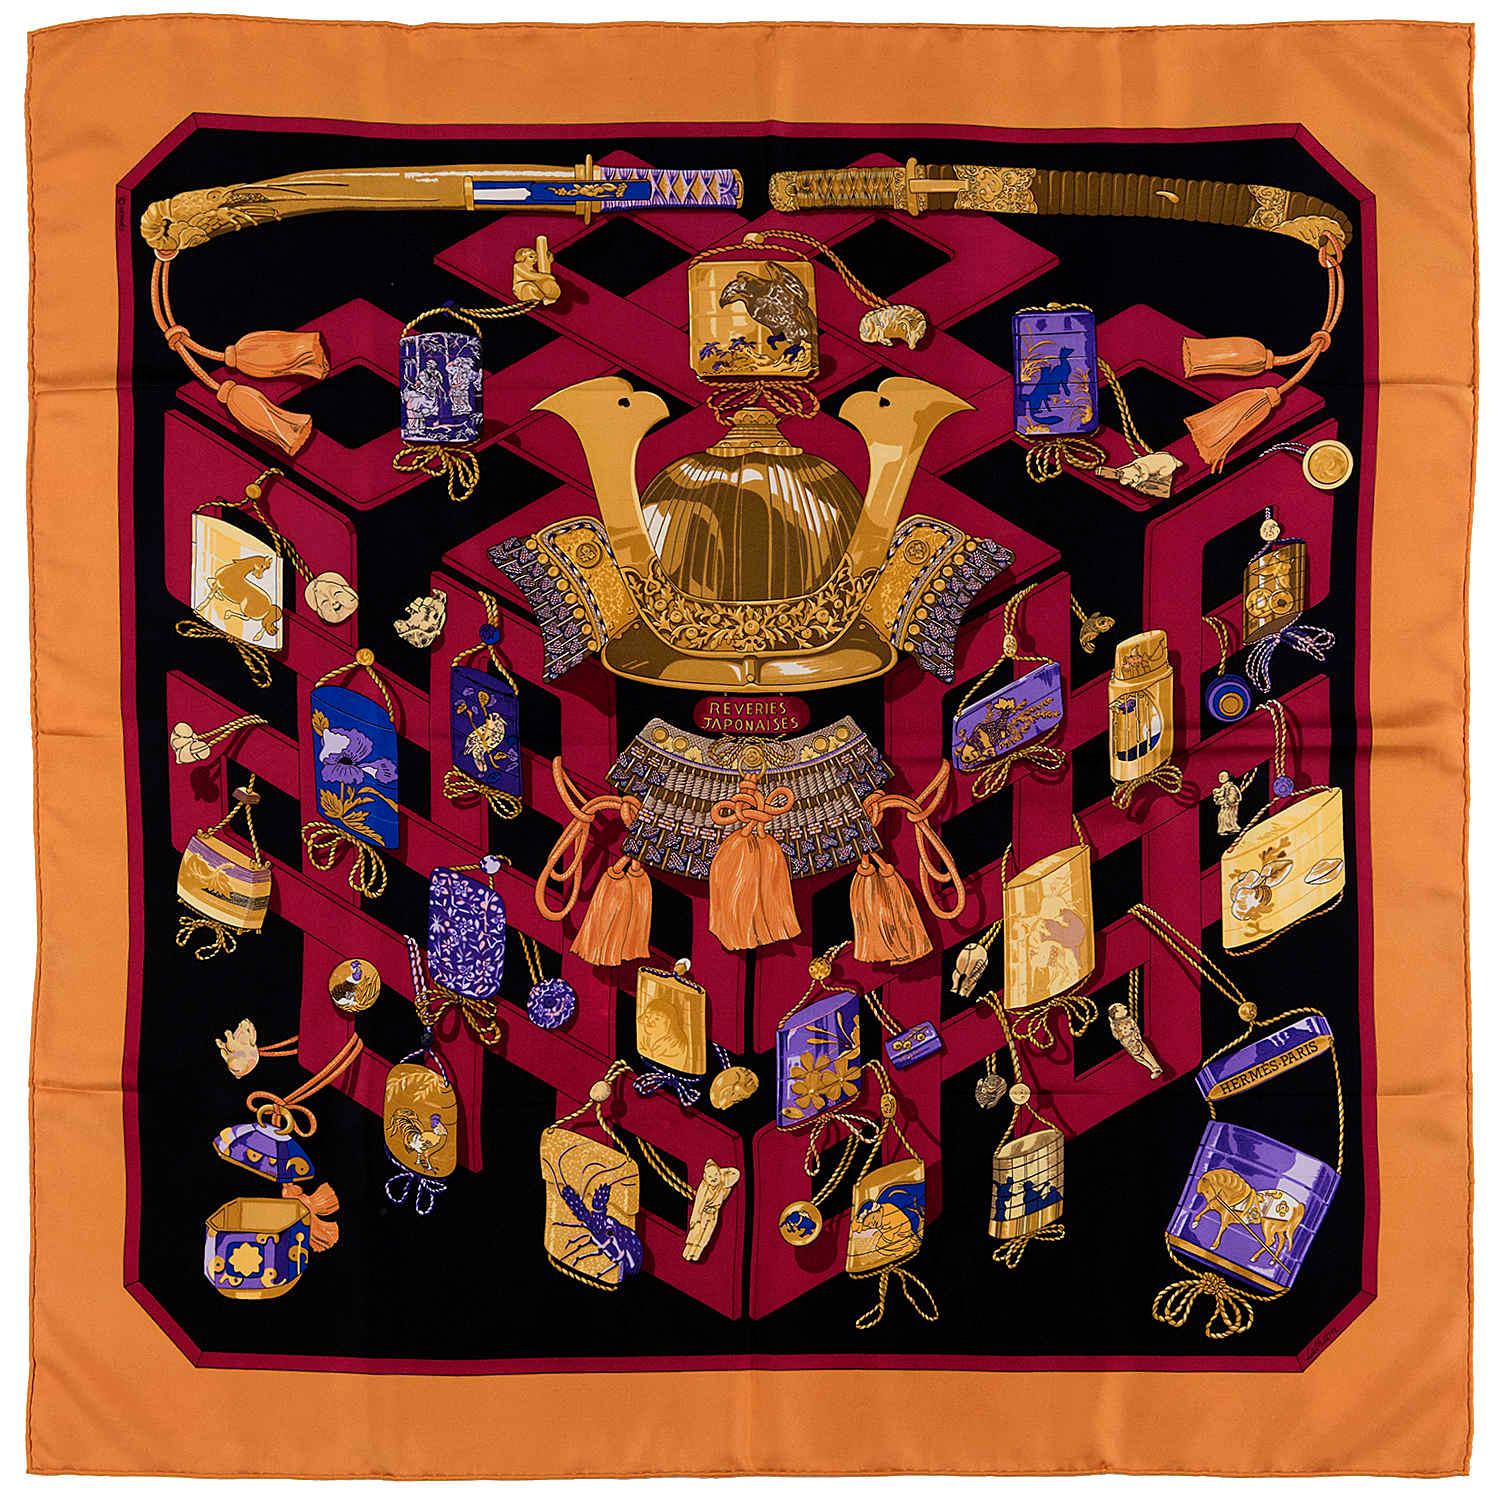 This fabulous and rare Vintage Hermes Silk Scarf, designed by Caty Latham in 1980, is an unrepeatable, beautiful example. The Japanese influences and depictions are illustrated in fine detail, in the most sumptuous colours. In 'Pristine' condition,